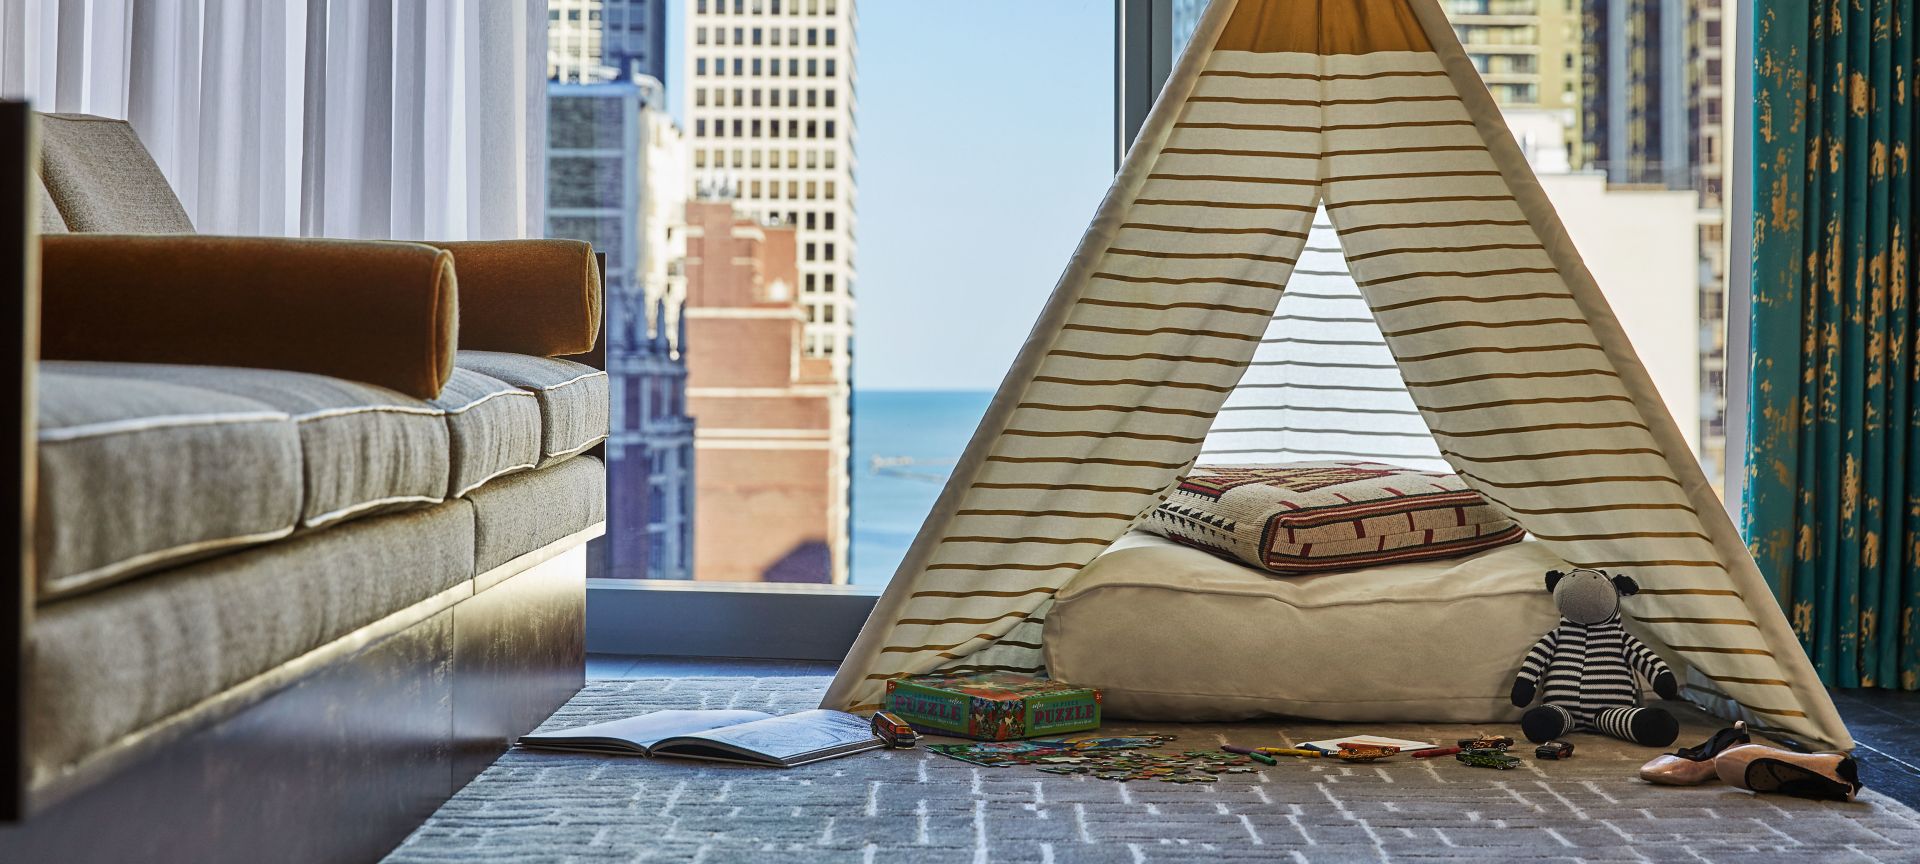 In-room tent with views of Lake Michigan